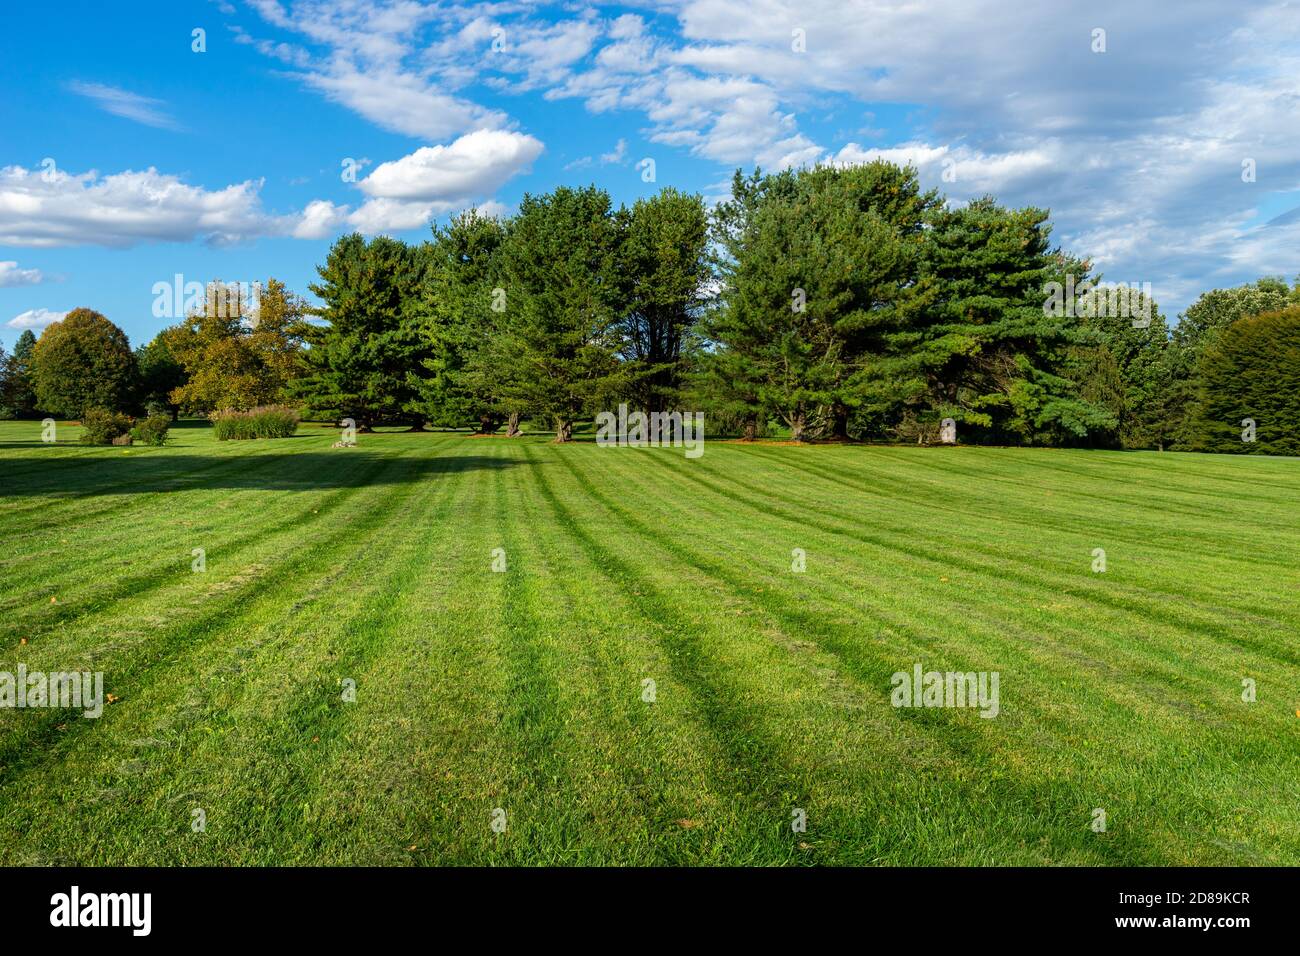 Large mowed grass area by trees in a park Stock Photo